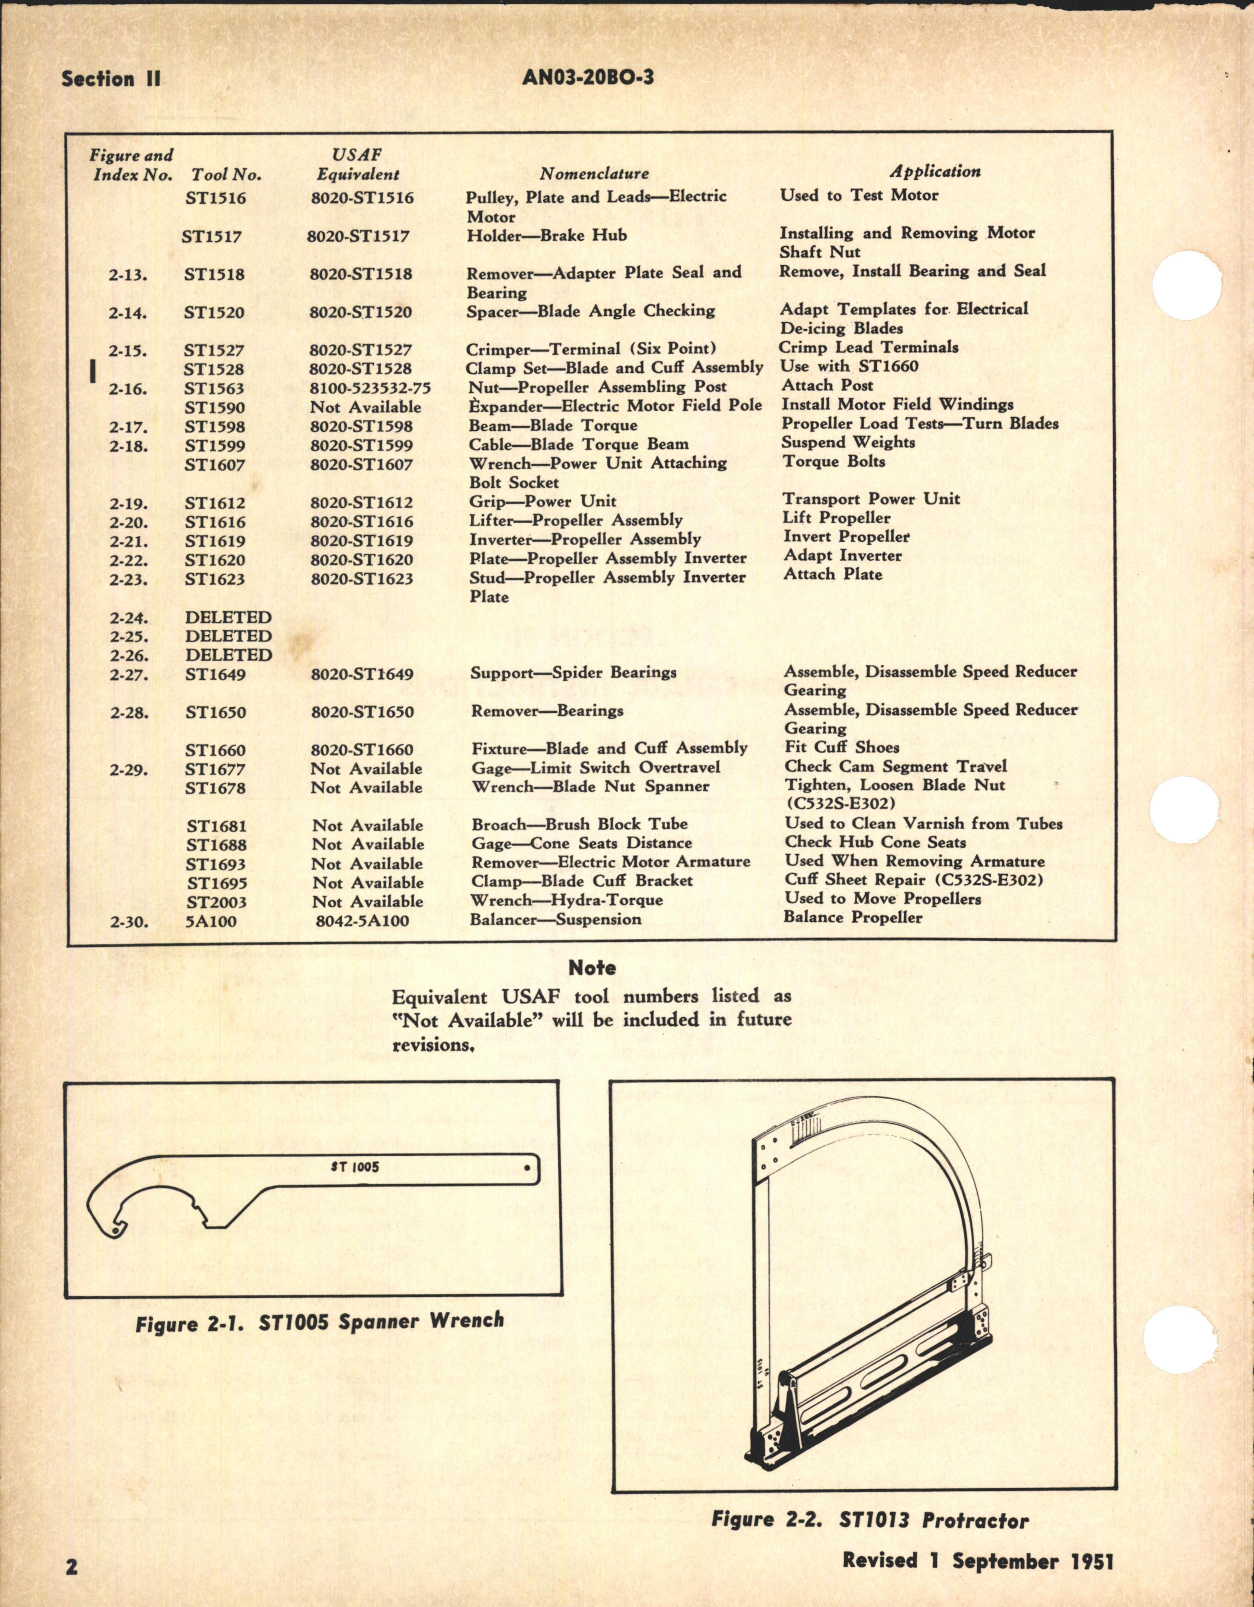 Sample page 6 from AirCorps Library document: Overhaul Instructions for Electric Propeller Models C532S-E